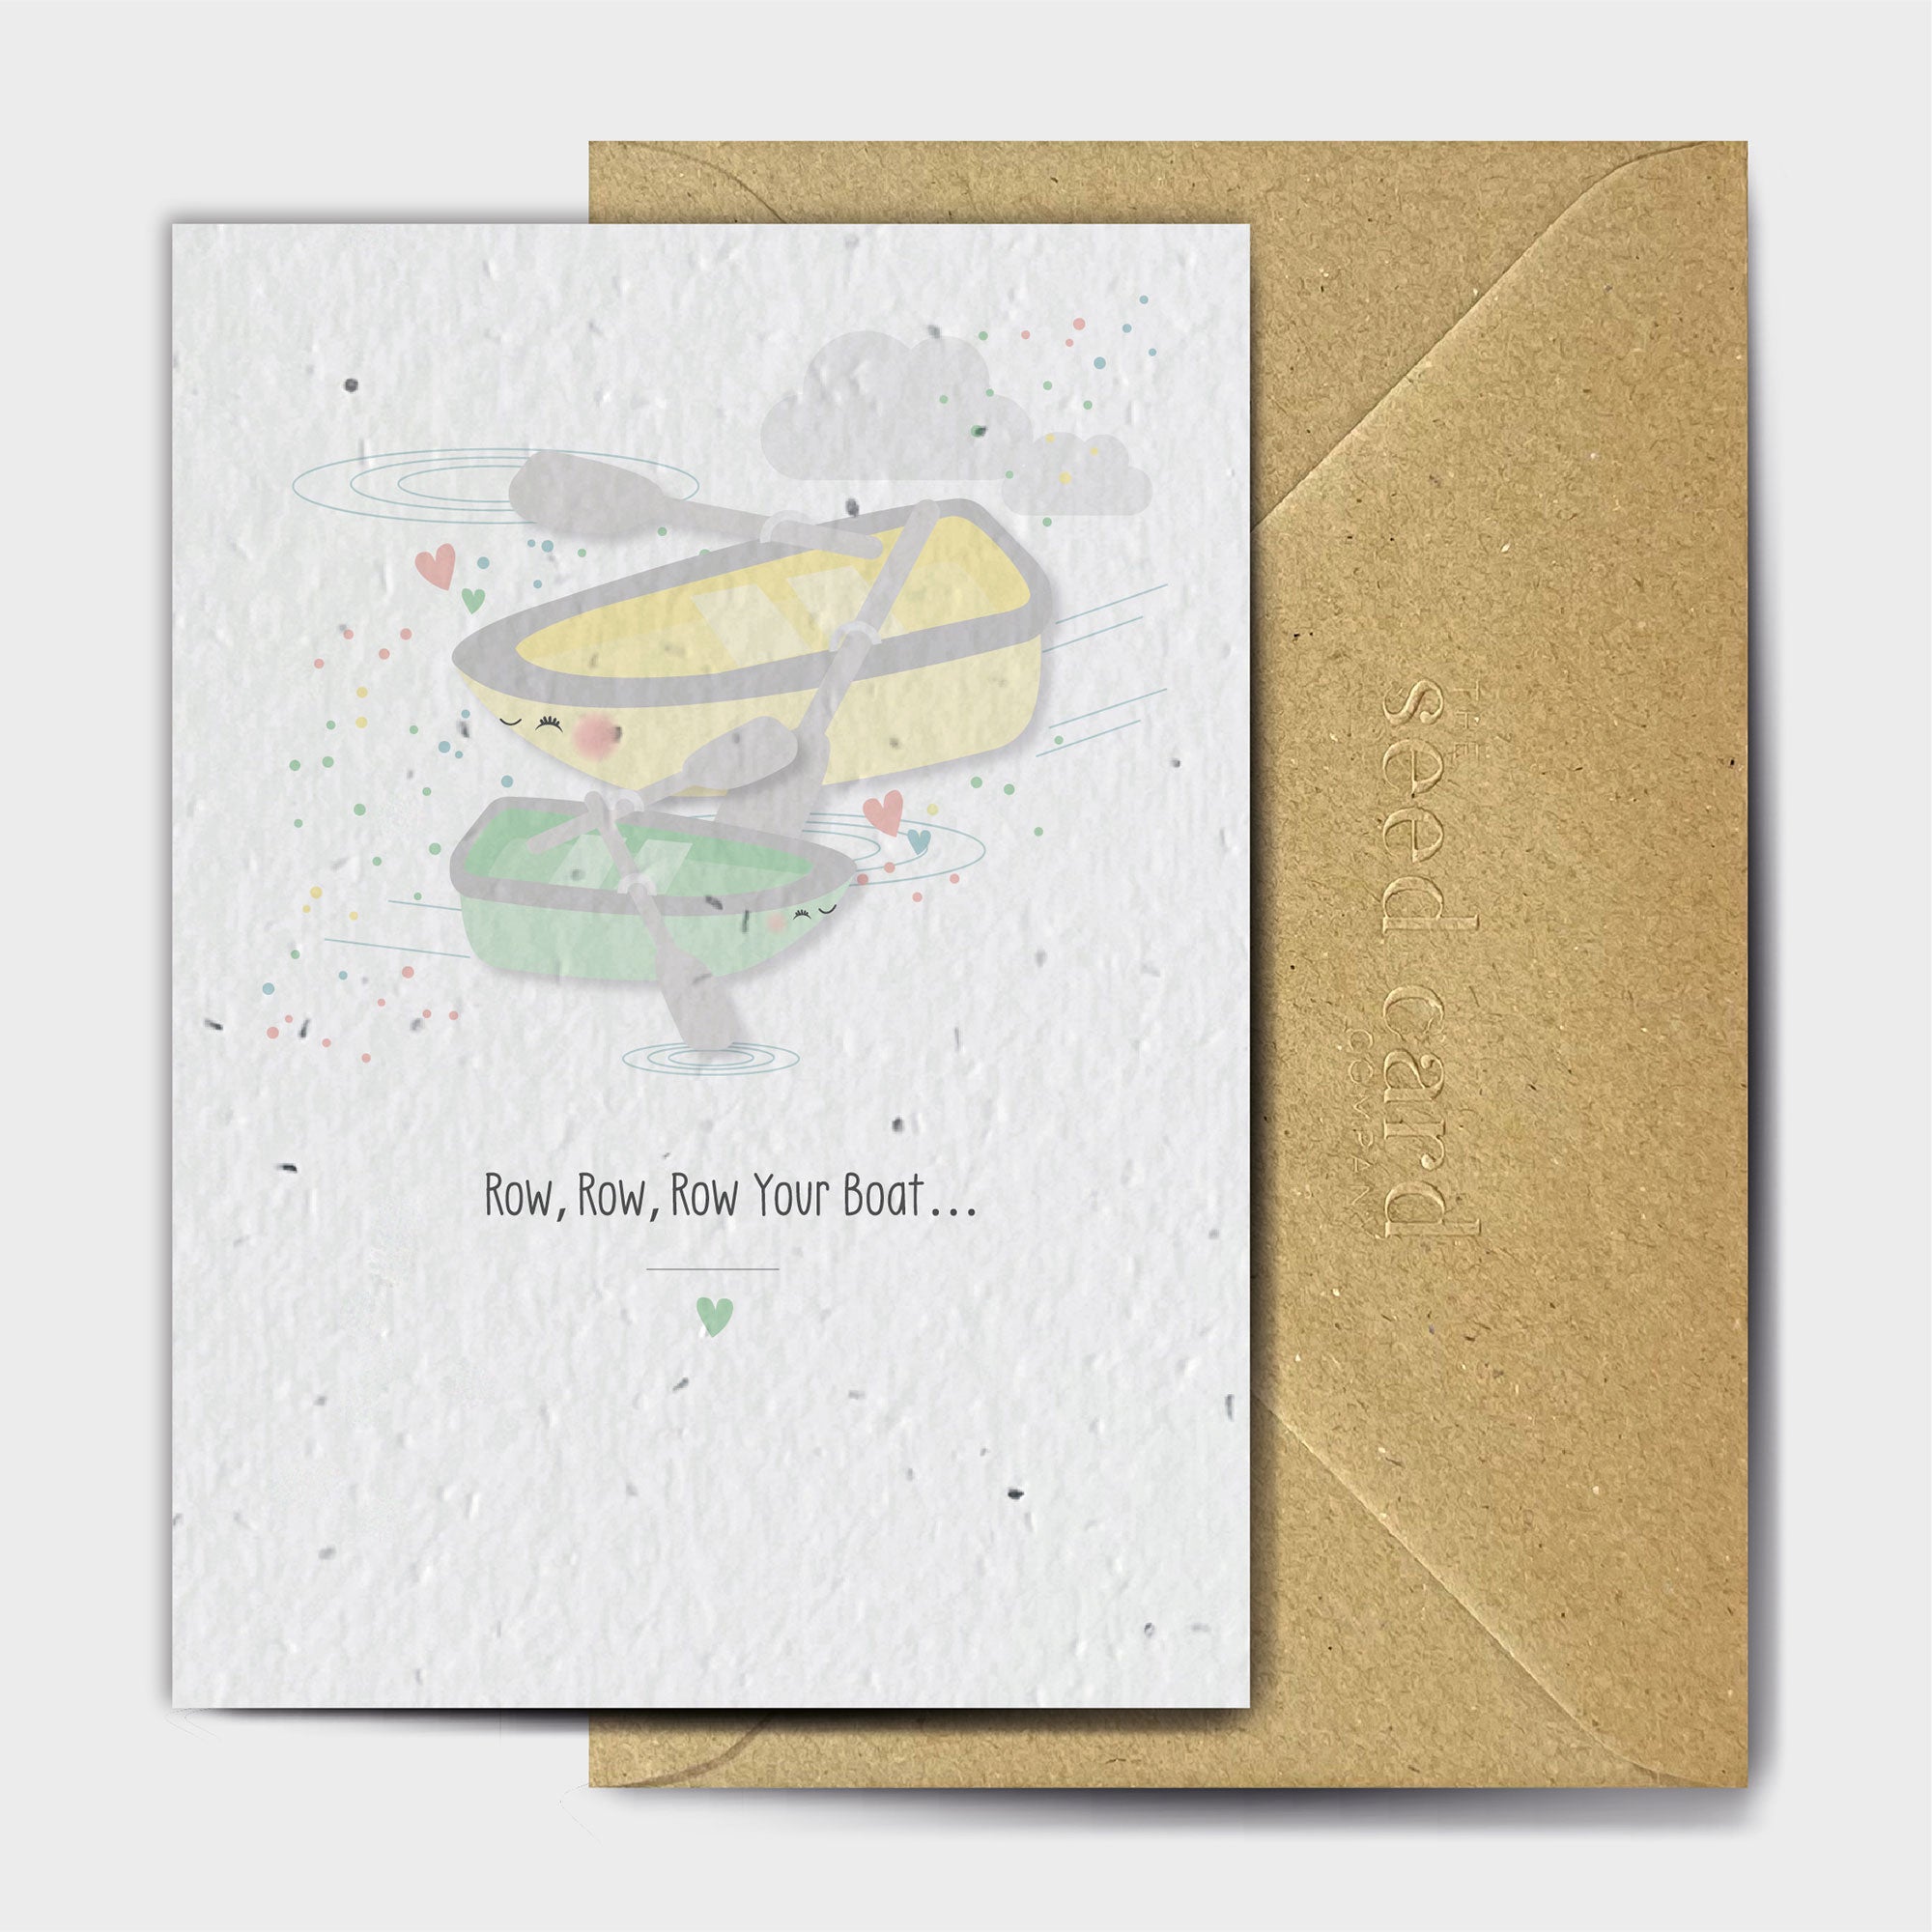 Shop online Row Row Your Boat - 100% biodegradable seed-embedded cards Shop -The Seed Card Company